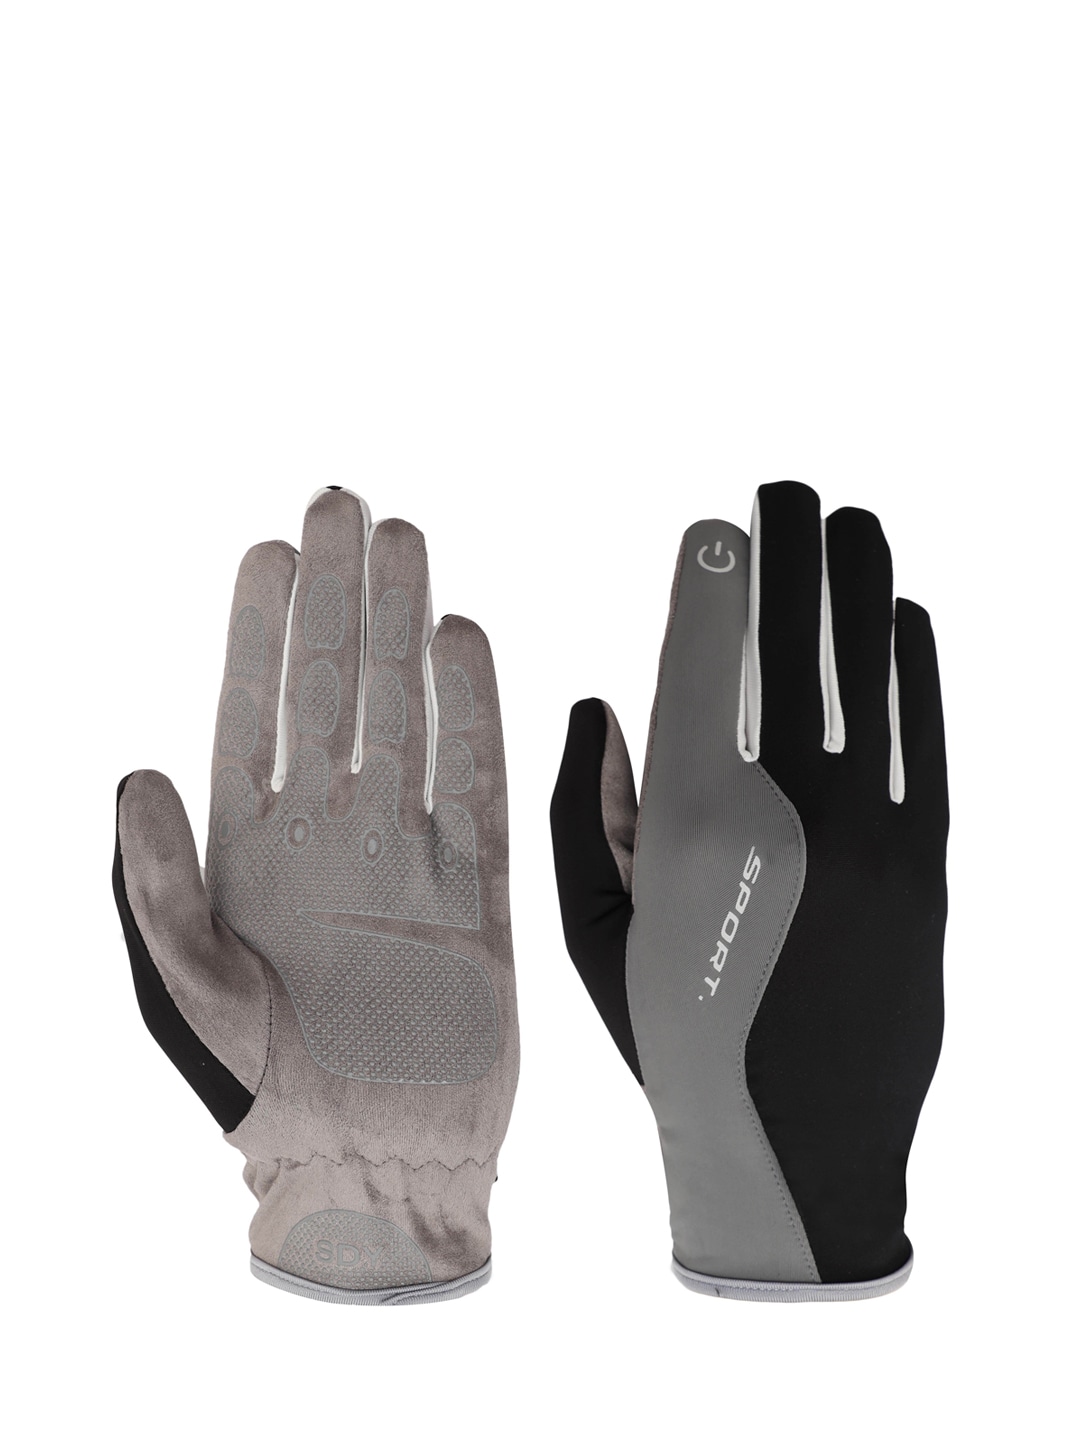 Accessories Gloves | FabSeasons Unisex Black Patterned Cycling Gloves - MO50154